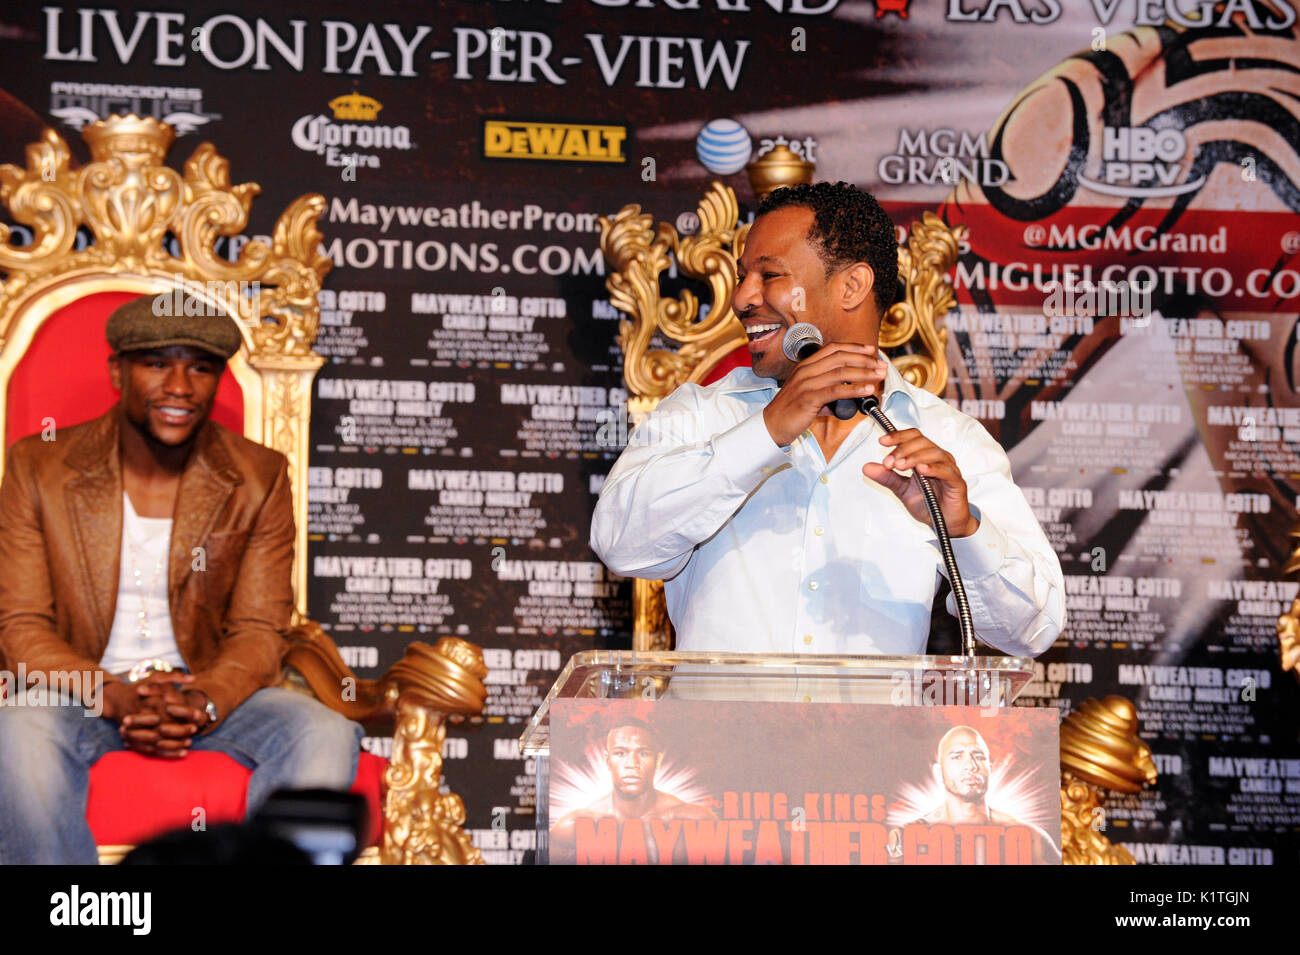 (L-R) Boxers Floyd Mayweather Shane Mosley attend press conference Grauman's Chinese Theatre Hollywood March 1,2012. Mayweather Cotto will meet WBA Super Welterweight World Championship fight May 5 MGM Grand Las Vegas. Stock Photo